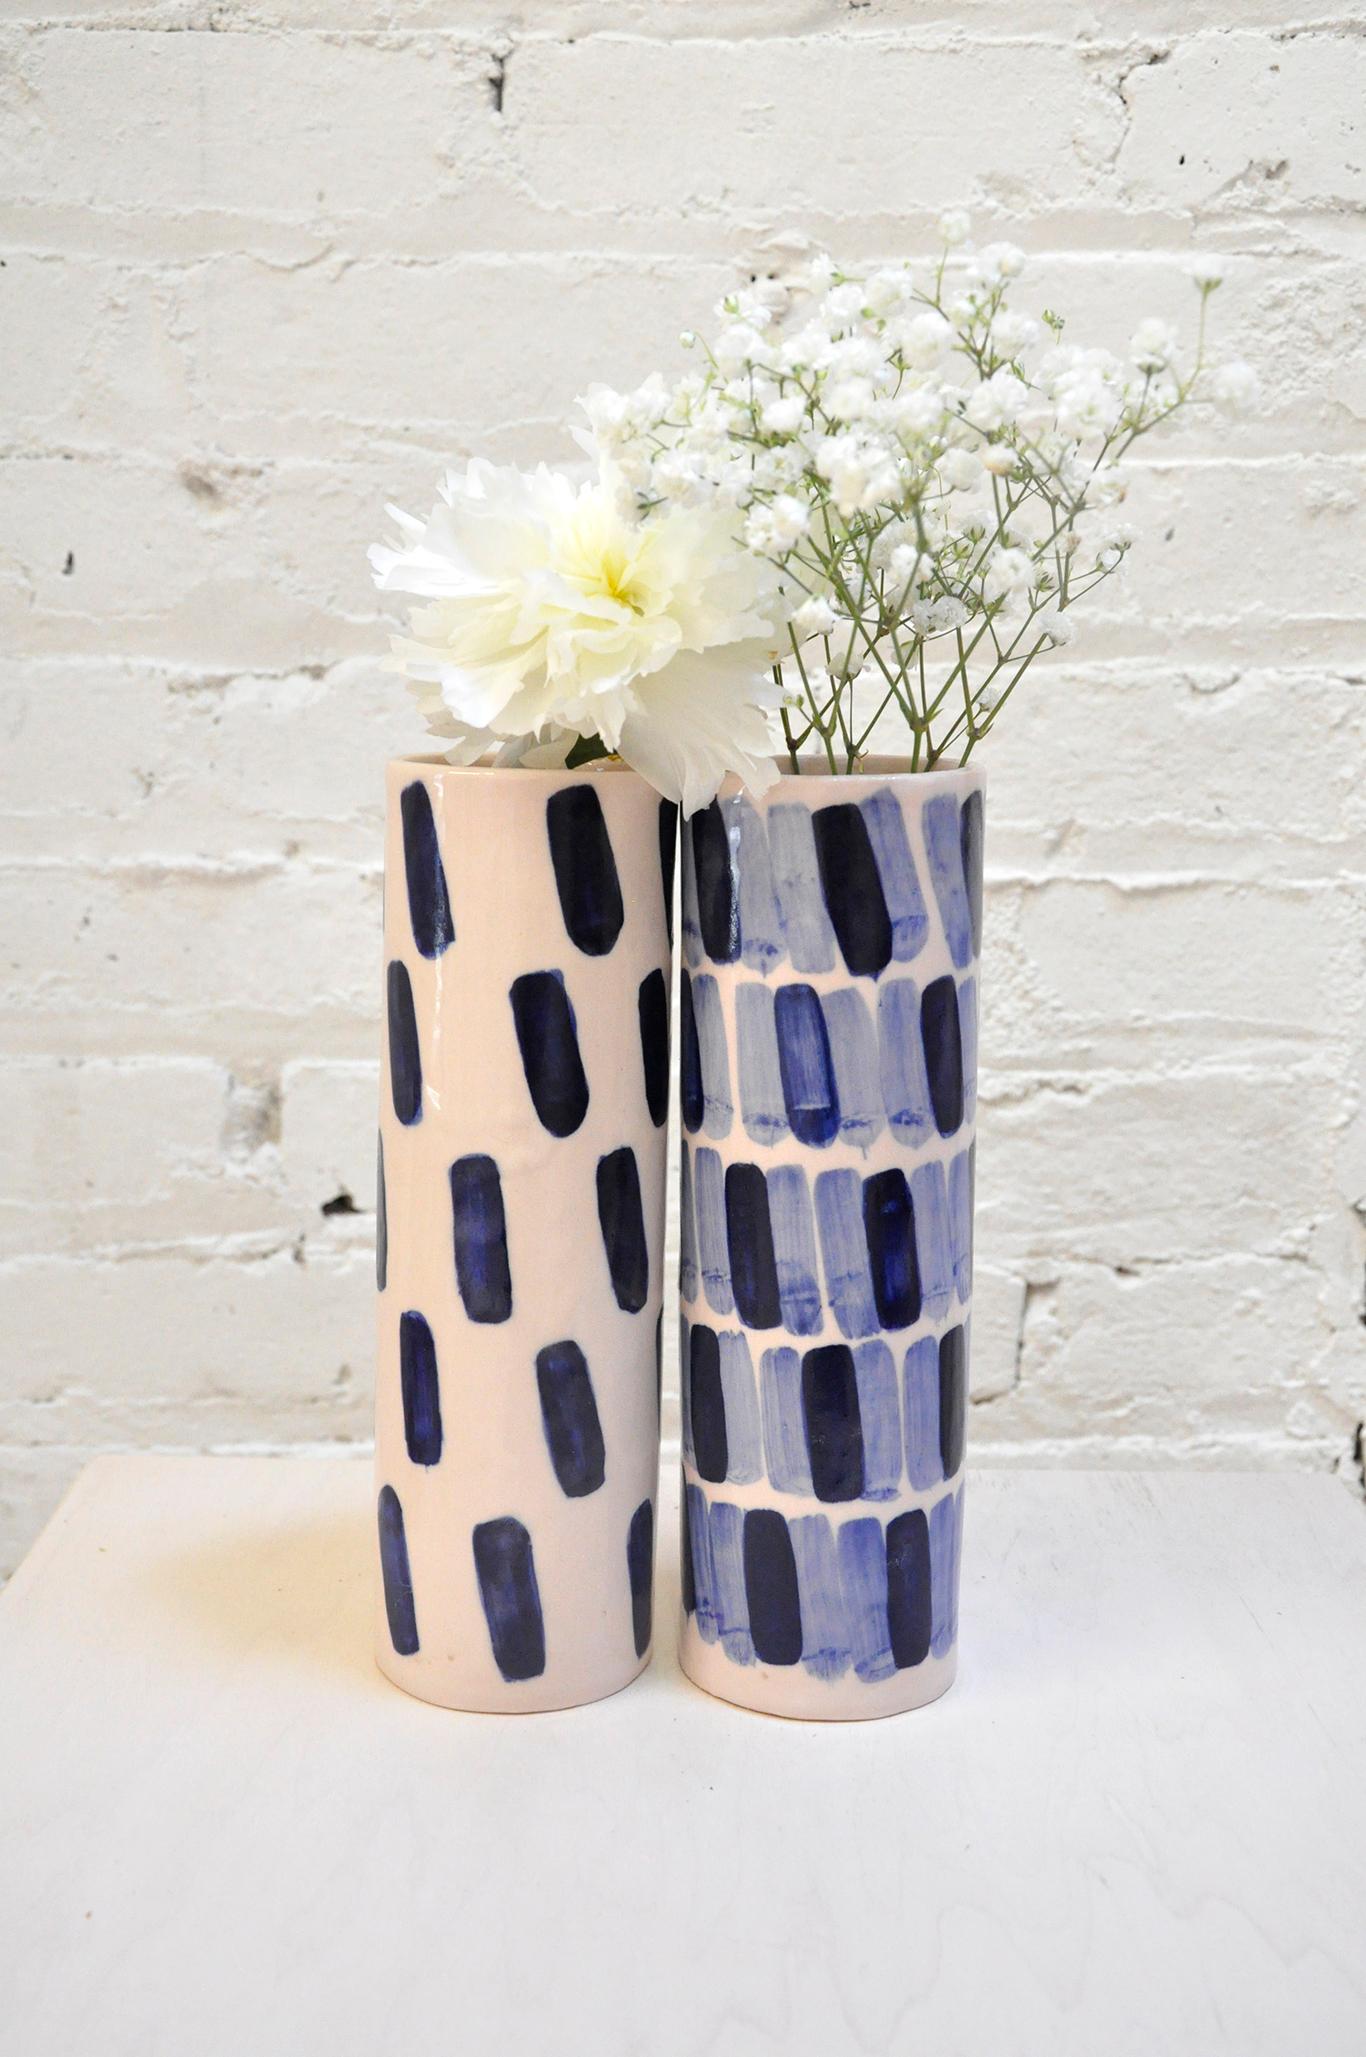 Hand-built porcelain vases by Isabel Halley, in hand-dyed ballet pink with striking cobalt glaze brush strokes.

Dimensions: 8